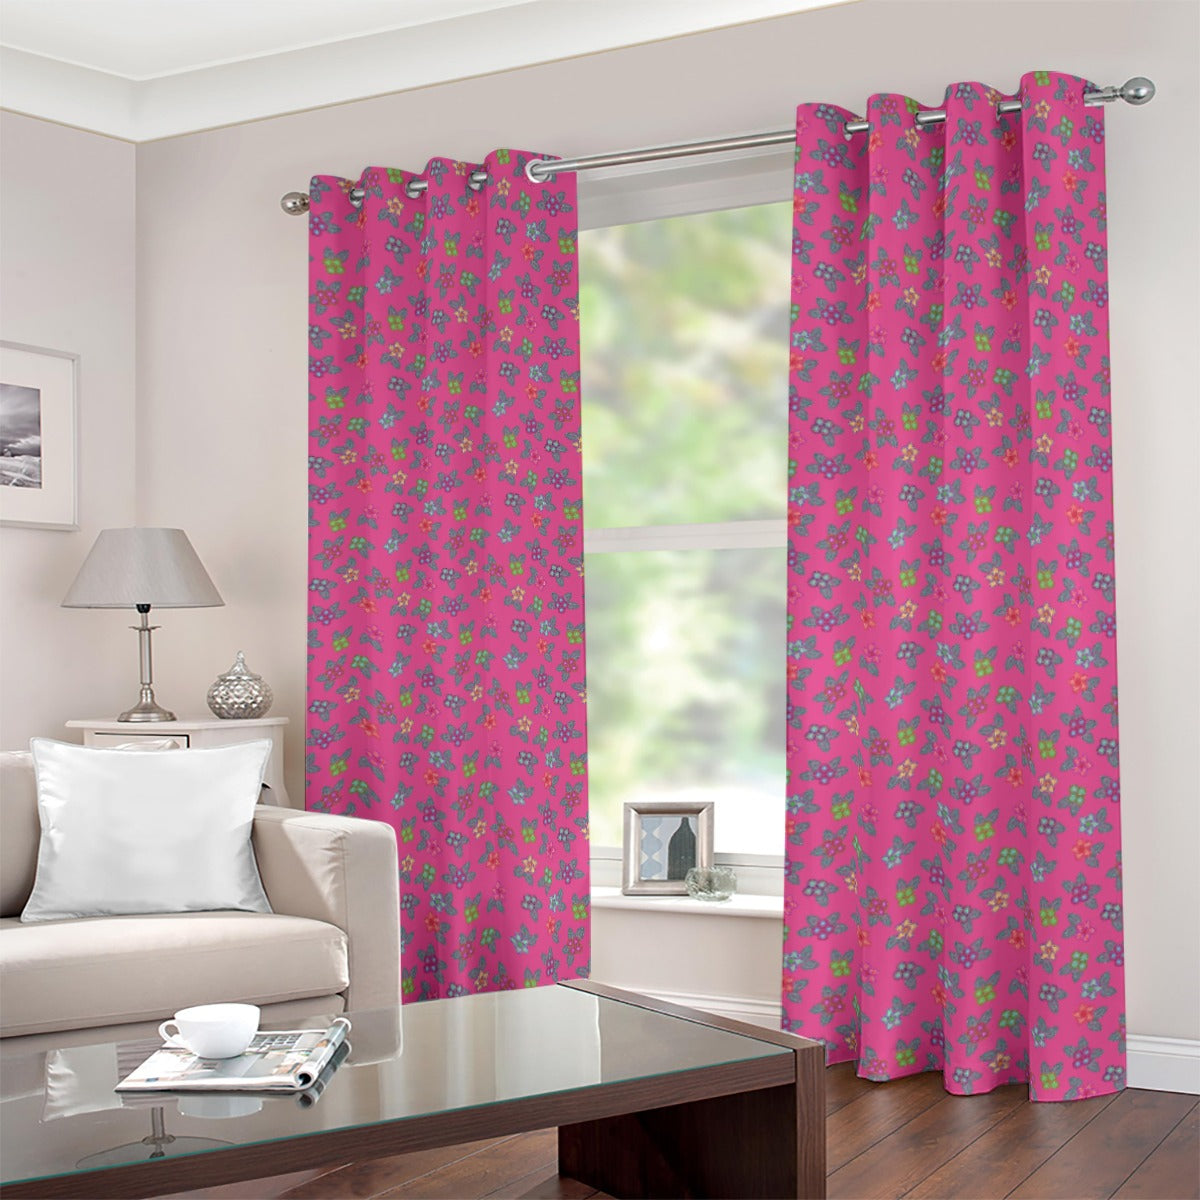 Berry Flowers Pink Window Blackout Curtain  (42 inch x 45 inch)